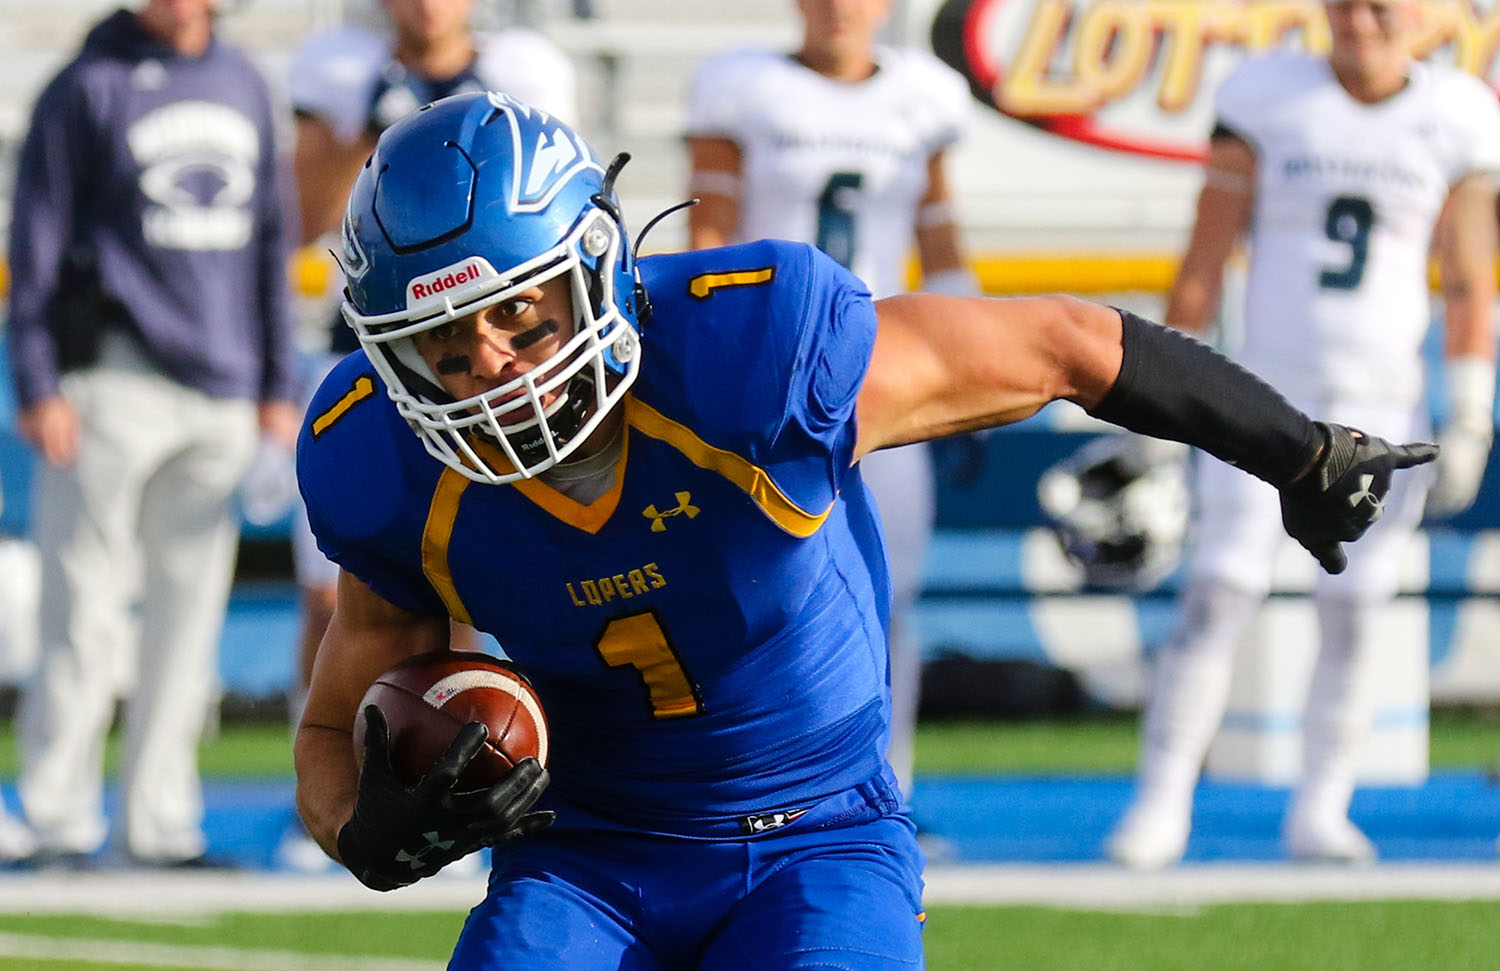 Luke Quinn, a sixth-year senior from Scottsdale, Arizona, enters Saturday’s Mineral Water Bowl with 2,313 all-purpose yards and 20 touchdowns during his UNK career. (UNK Communications)